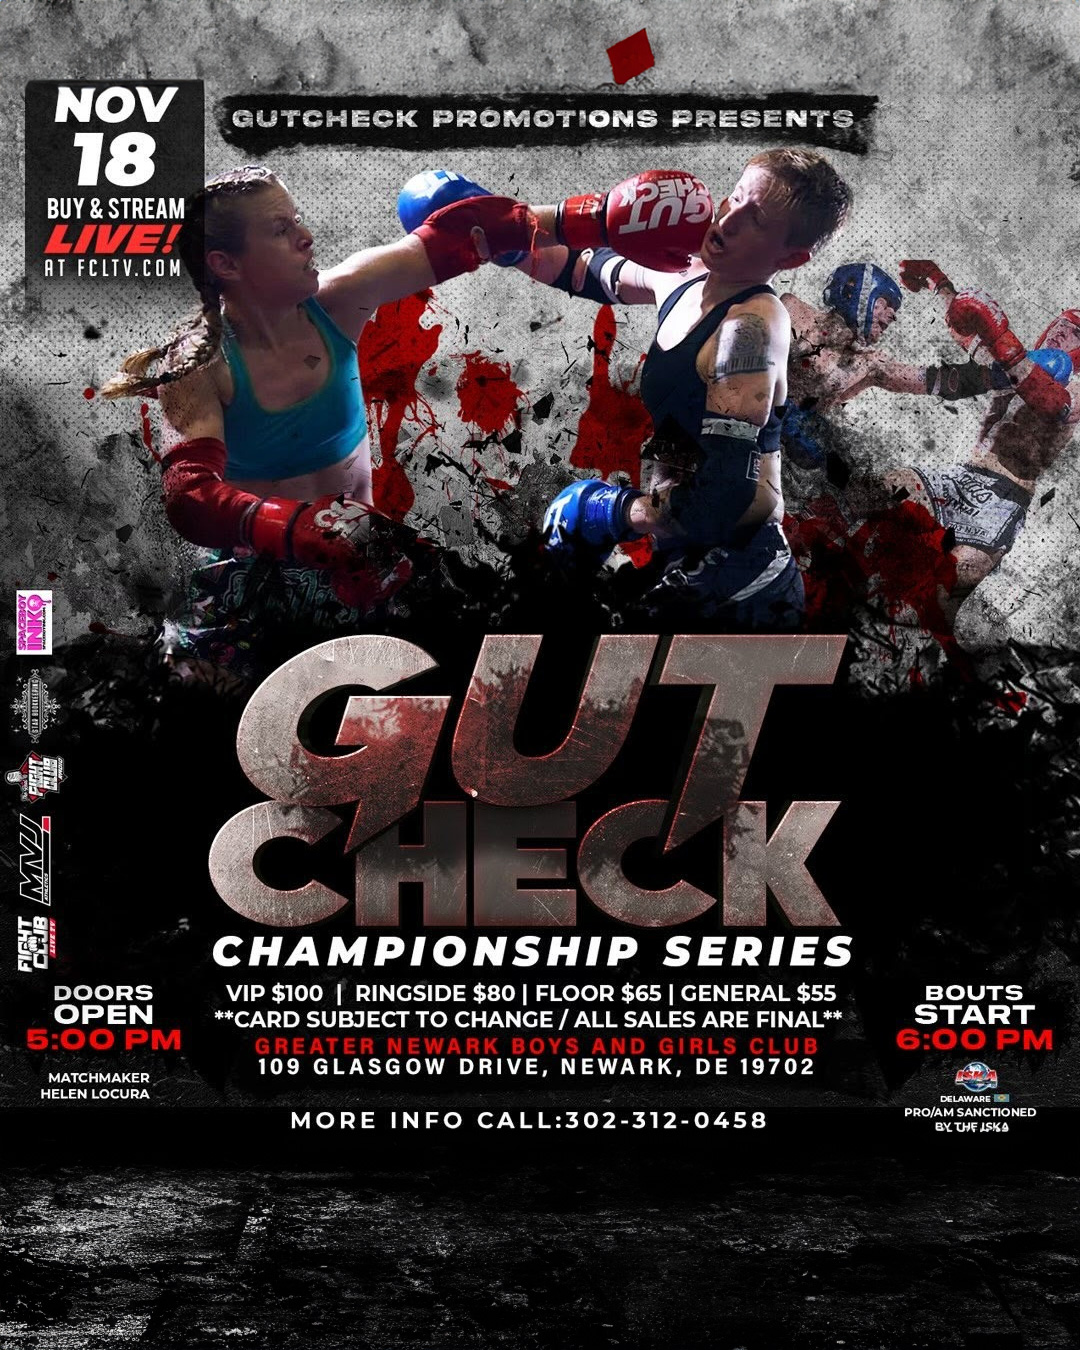 Watch Gut Check Promotions Championship Series 2 on Combat Sports Now